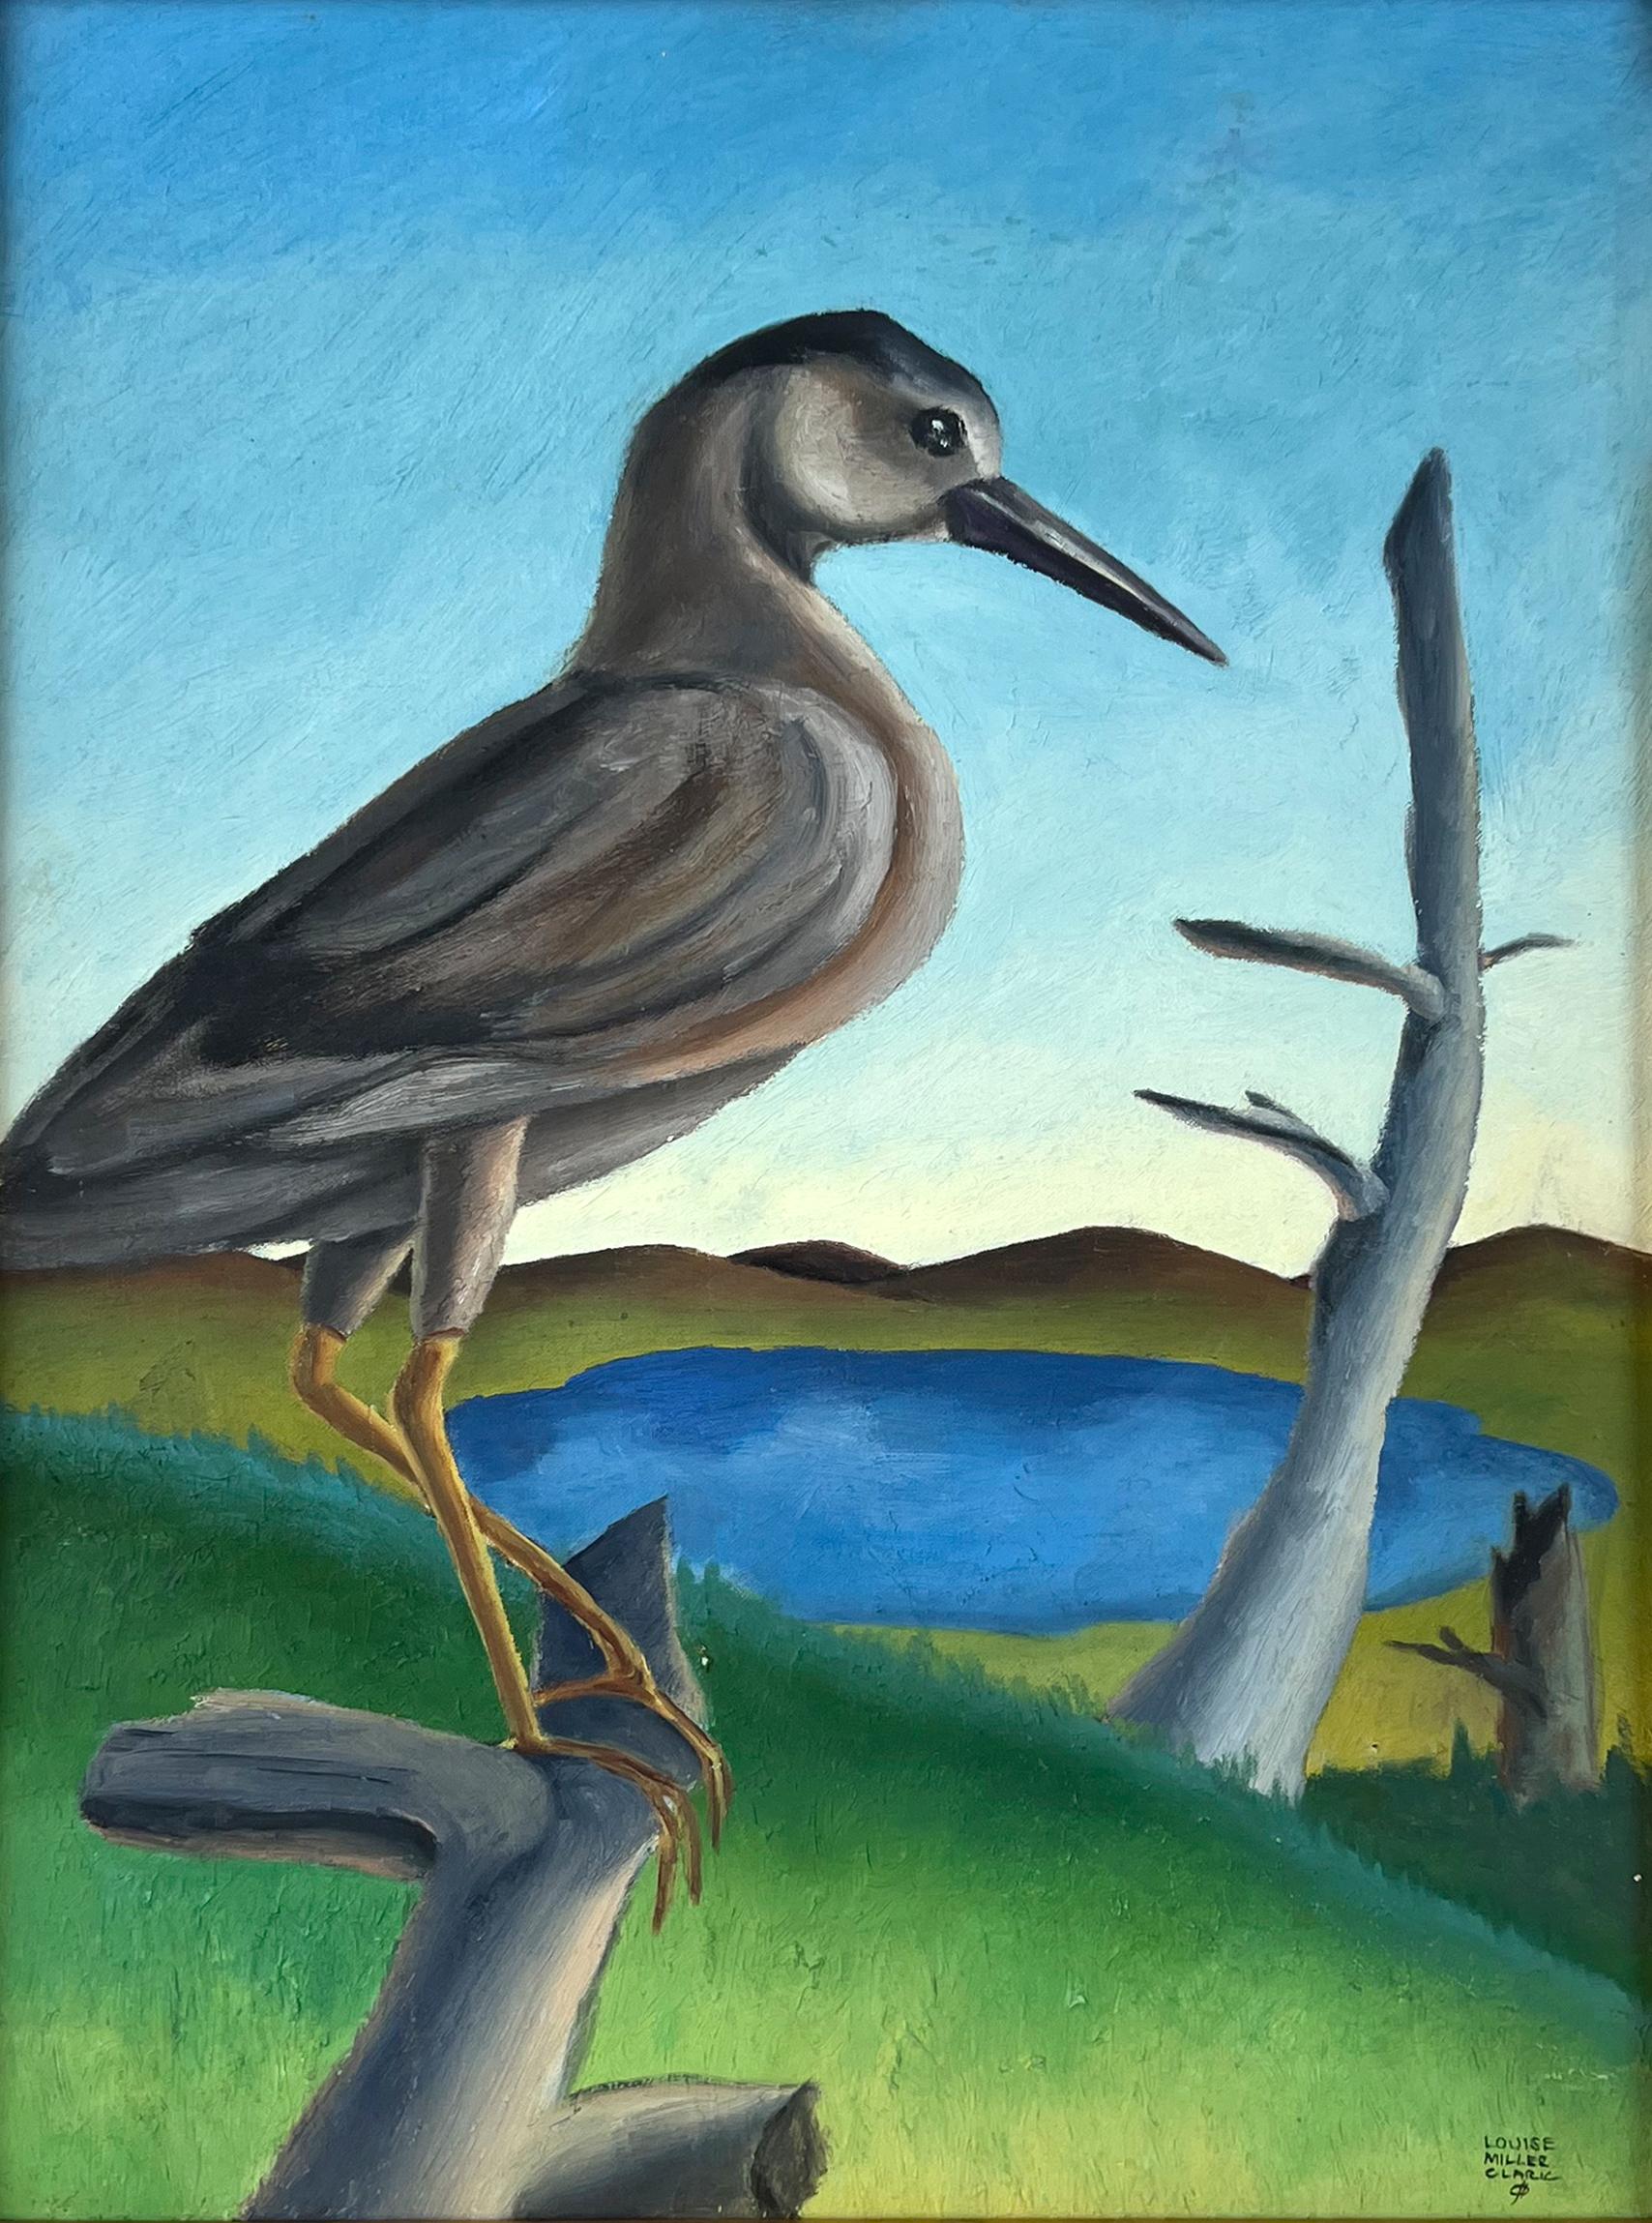 Mid Century Modern Shore Bird and Lake - Painting by Louise Miller Clark